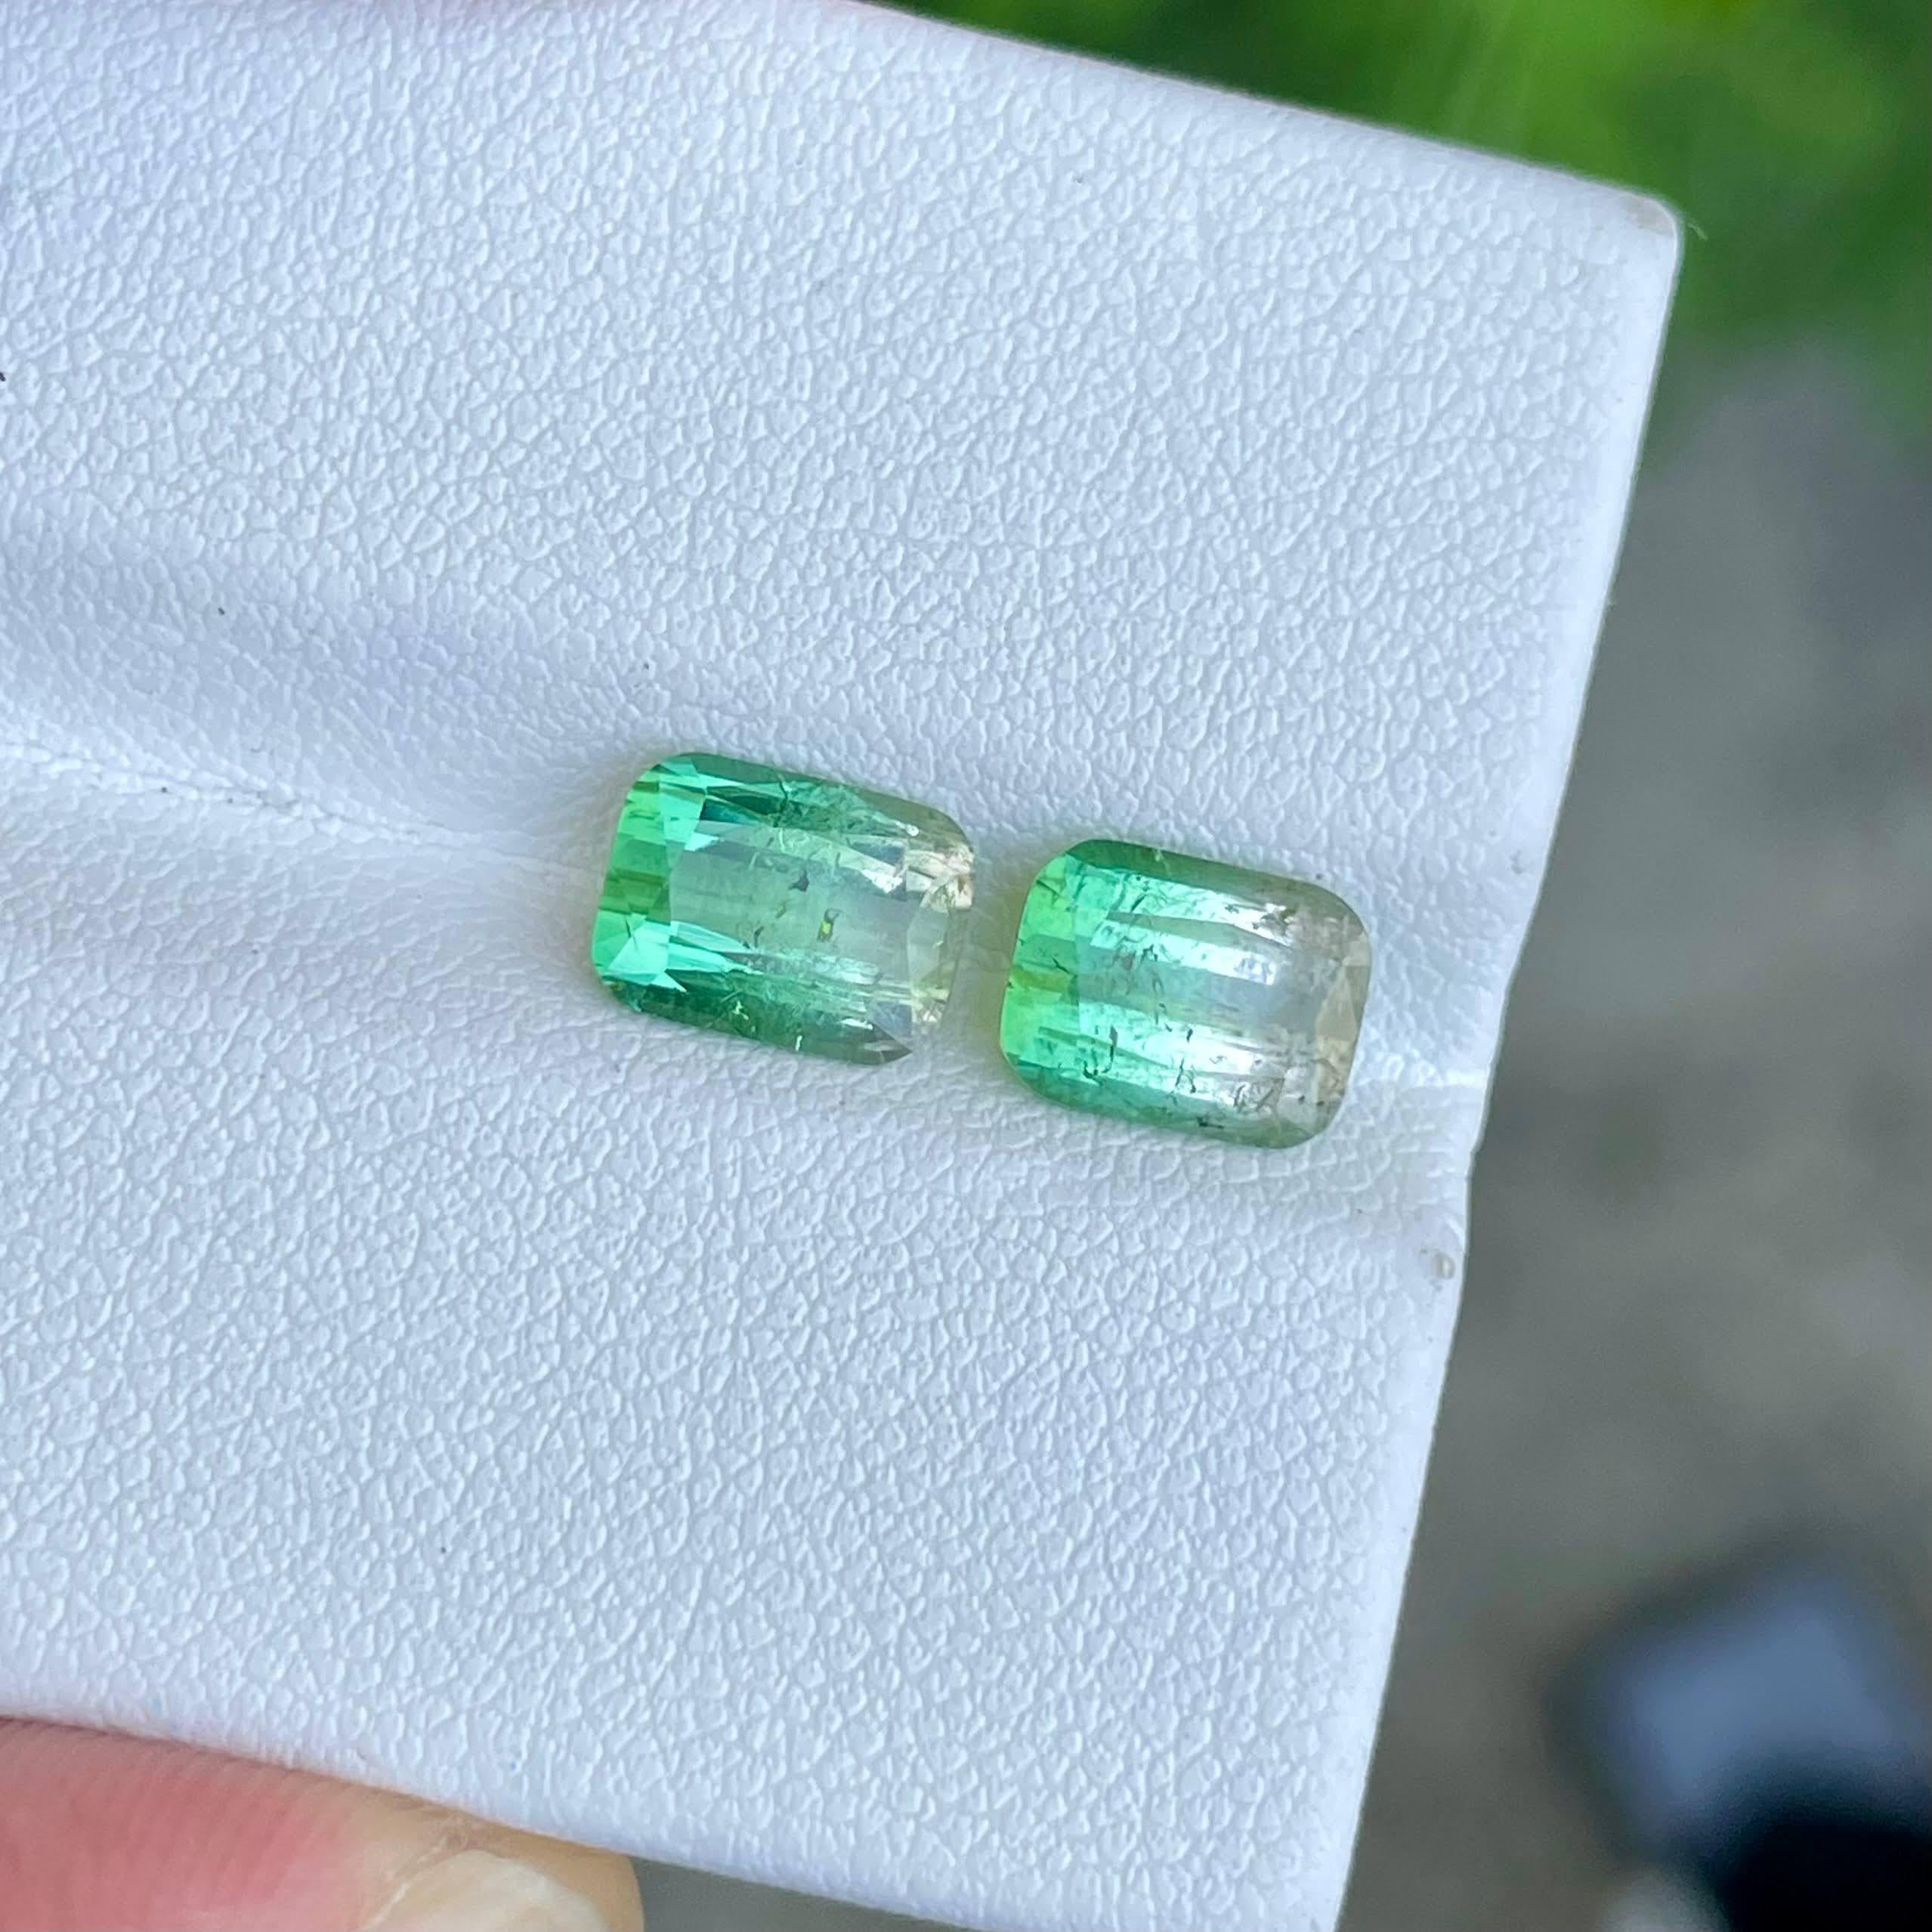 Weight: 3.79 carats
Dimensions: 8.2x6.1x4.2 mm and 8.1x6.1x4.5 mm
Treatment none 
Origin Afghanistan 
Clarity SI
Shape cushion
Cut fancy cushion 




These exquisite Bi-color tourmaline gemstones, totaling 3.79 carats, captivate with their natural